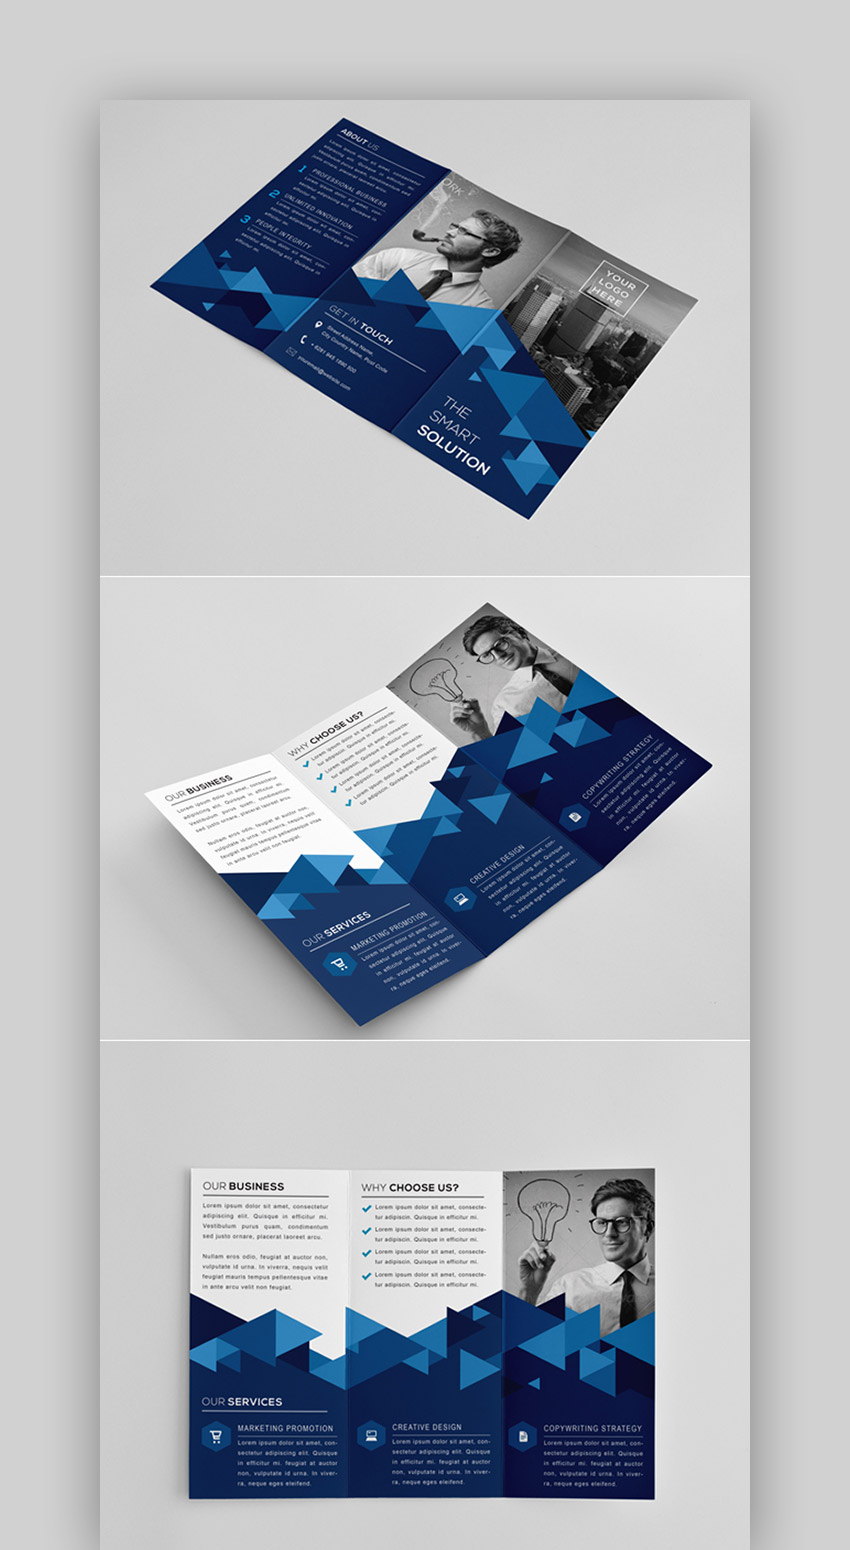 30 Best Indesign Brochure Templates – Creative Business With Membership Brochure Template